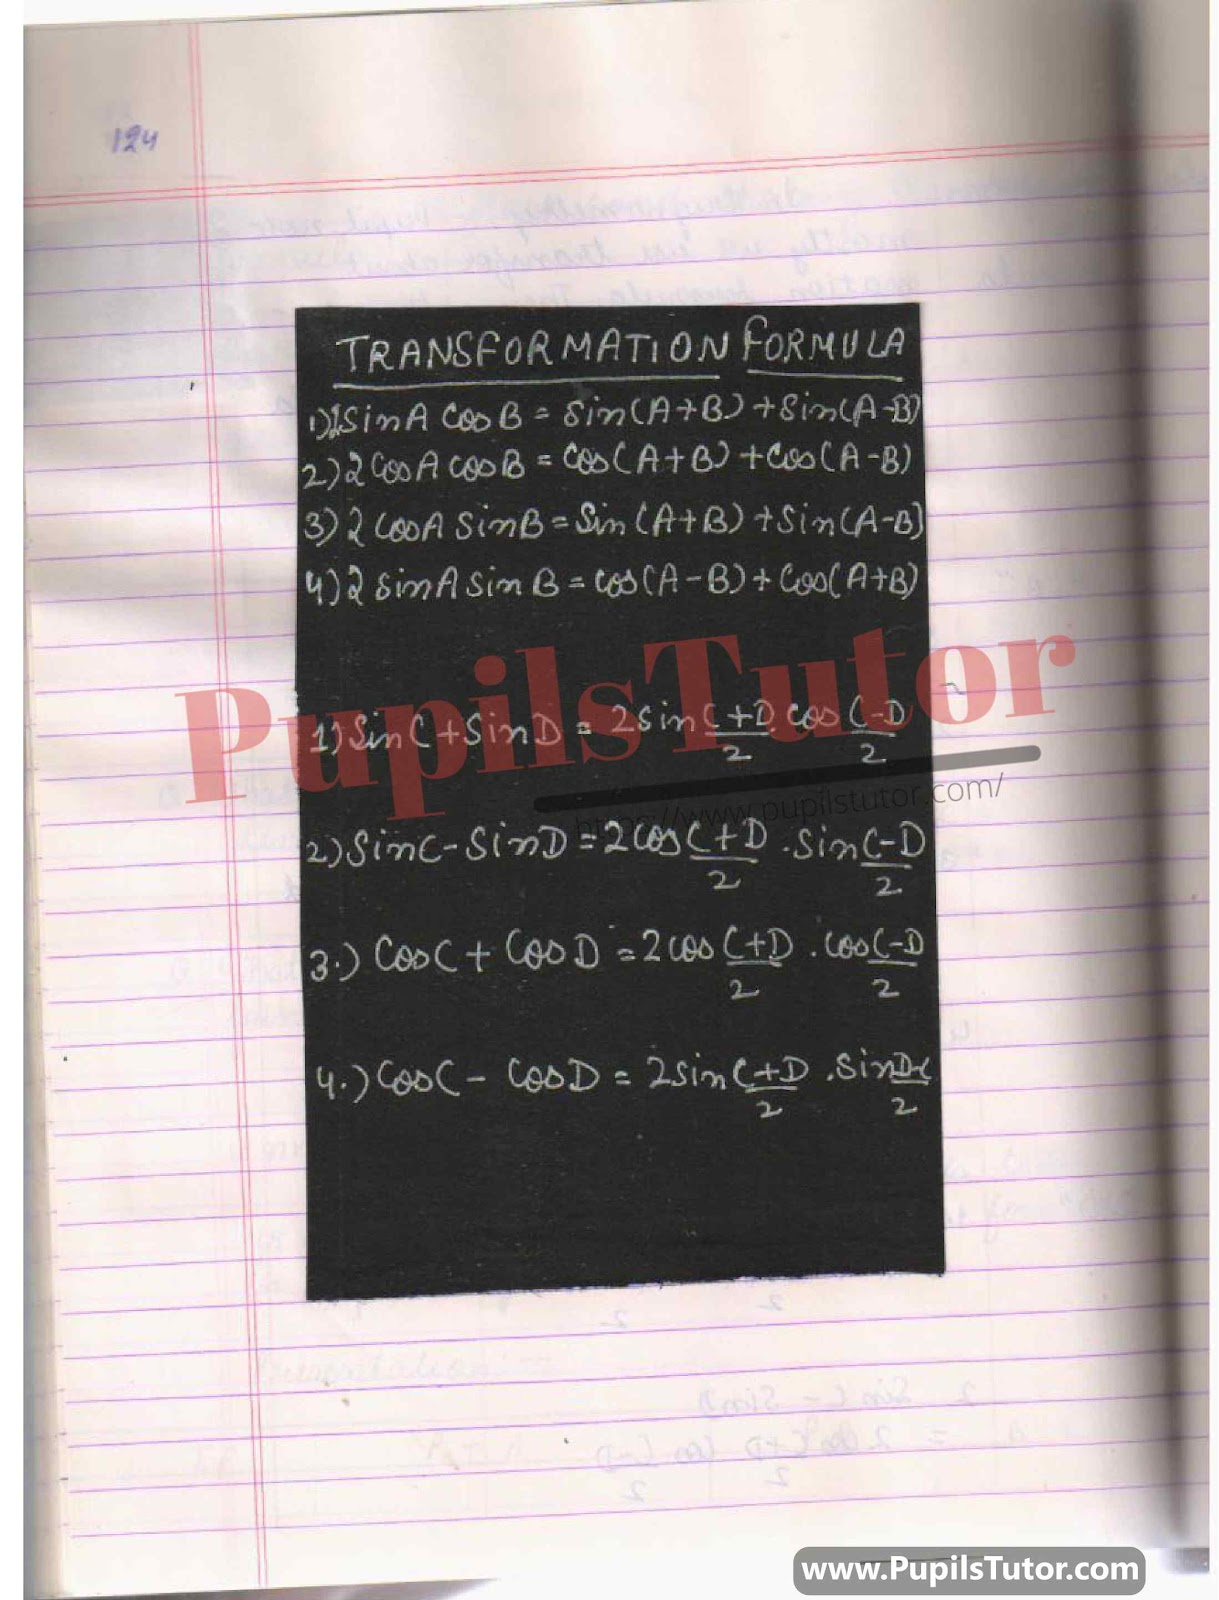 BED, DELED, BTC, BSTC, M.ED, DED And NIOS Teaching Of Math Innovative Digital Lesson Plan Format On Trigonometry Transformation Formula Topic For Class 4th 5th 6th 7th 8th 9th, 10th, 11th, 12th  – [Page And Photo 4] – pupilstutor.com